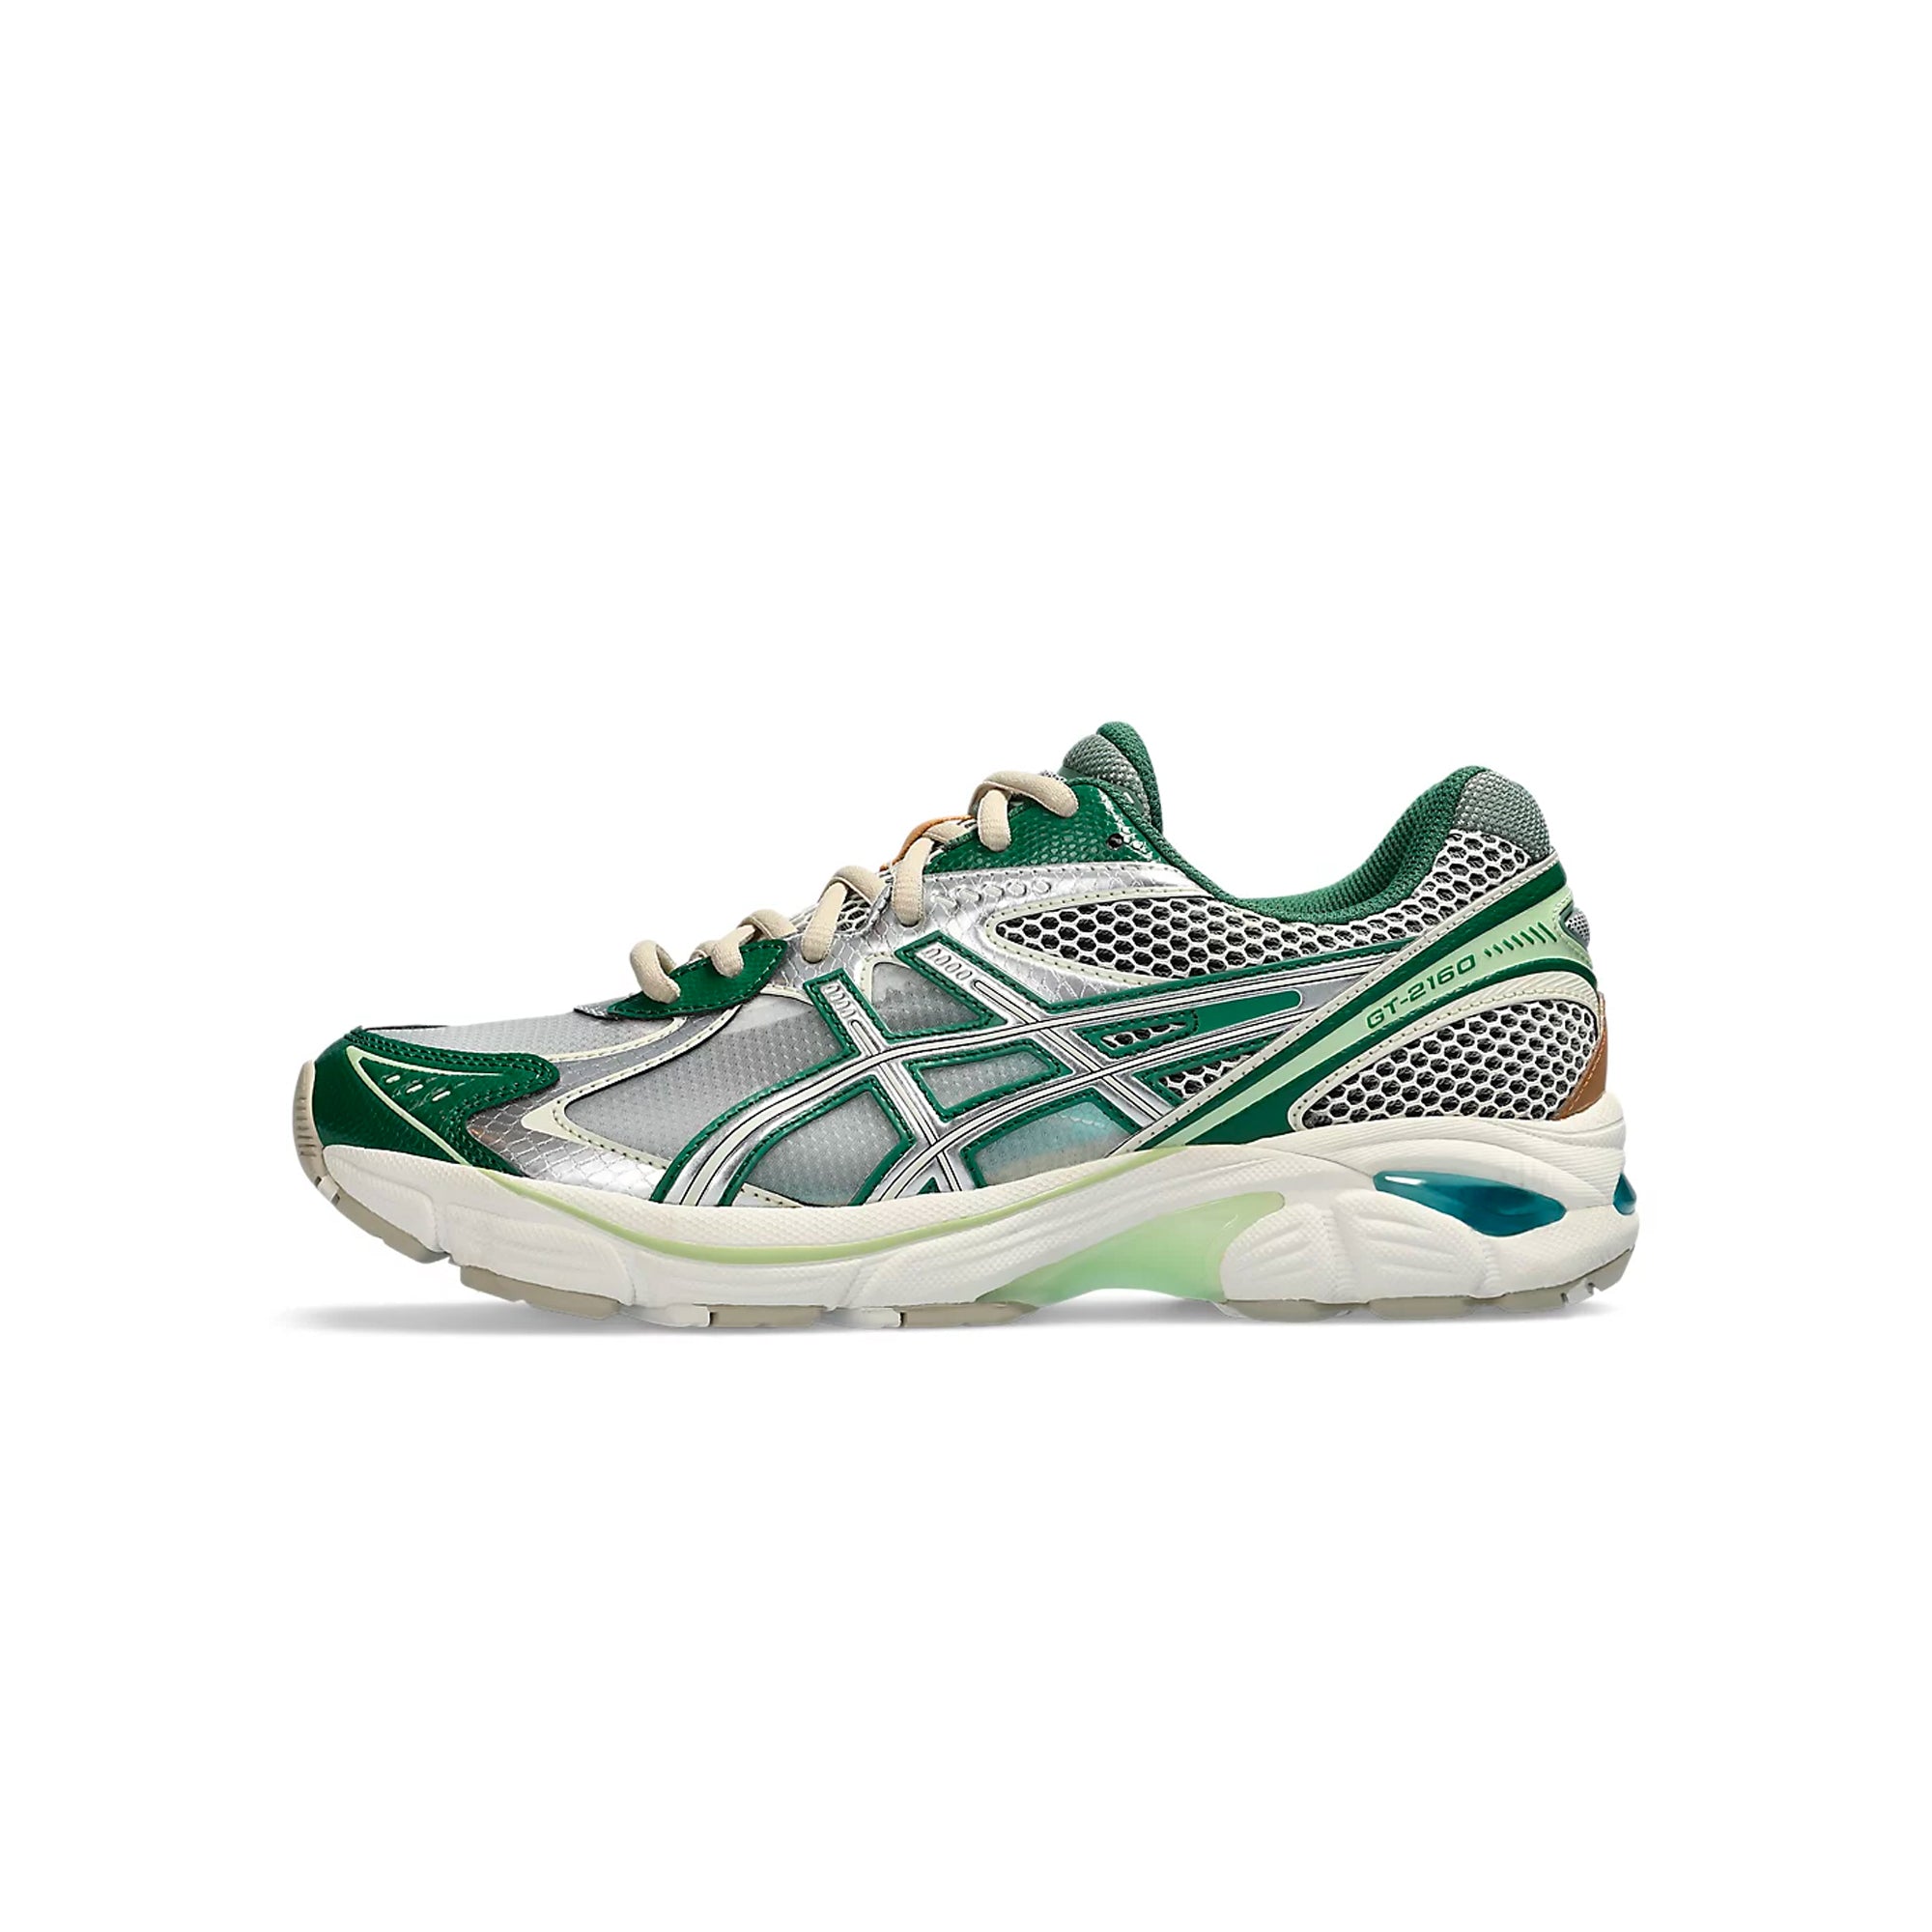 Asics x Above The Clouds GT-2160 Shoes card image